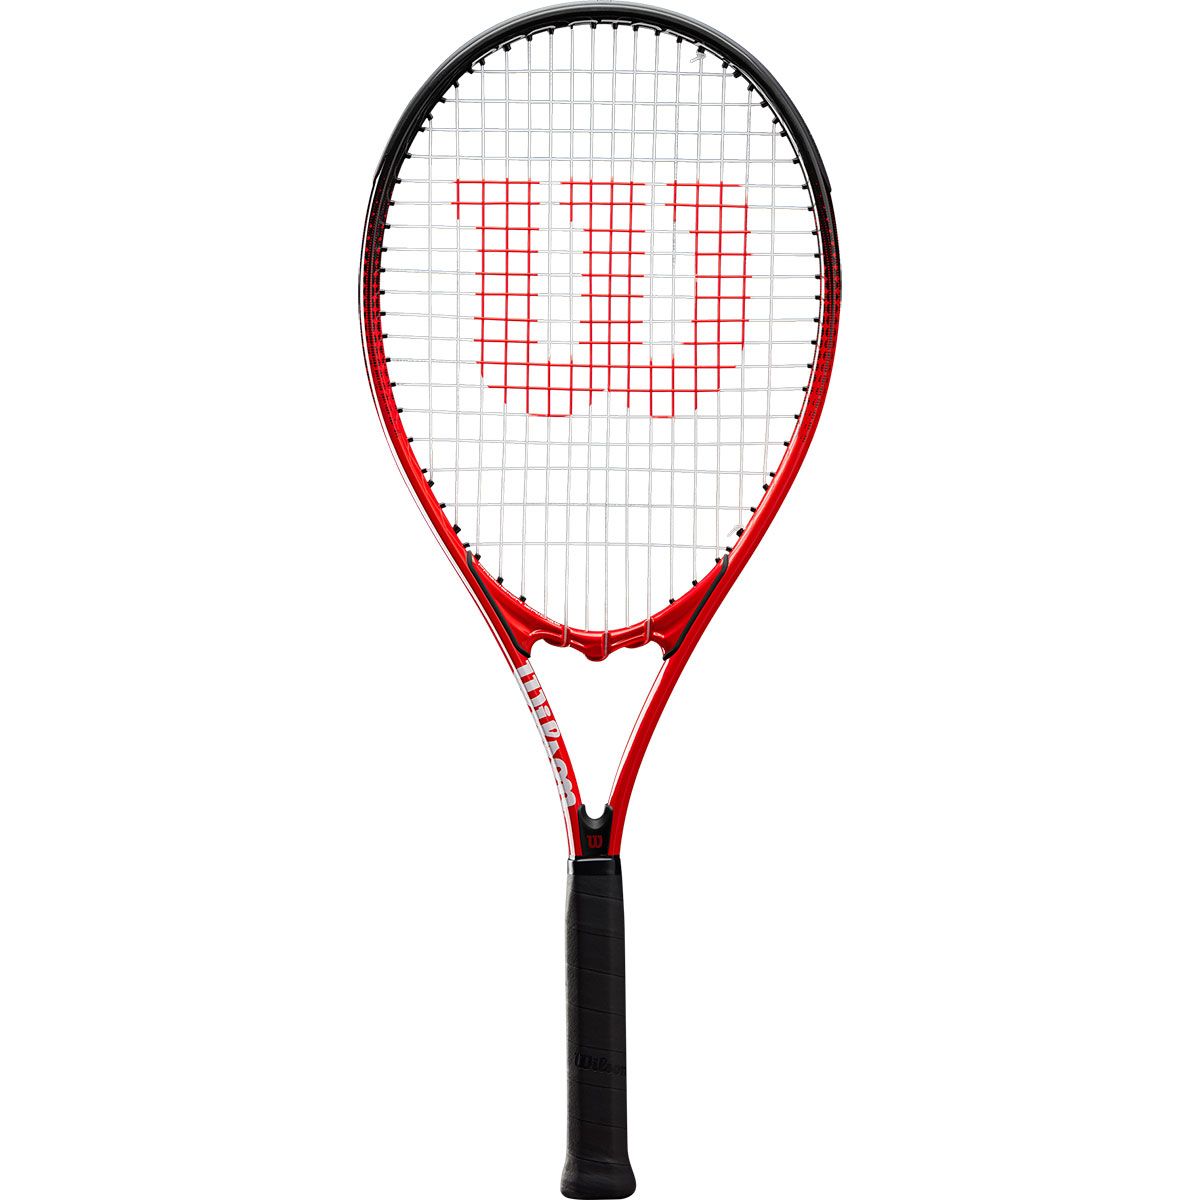 WILSON PRO SOFT OVERGRIP FOR TENNIS , IDEAL OVER GRIP FOR SQUASH